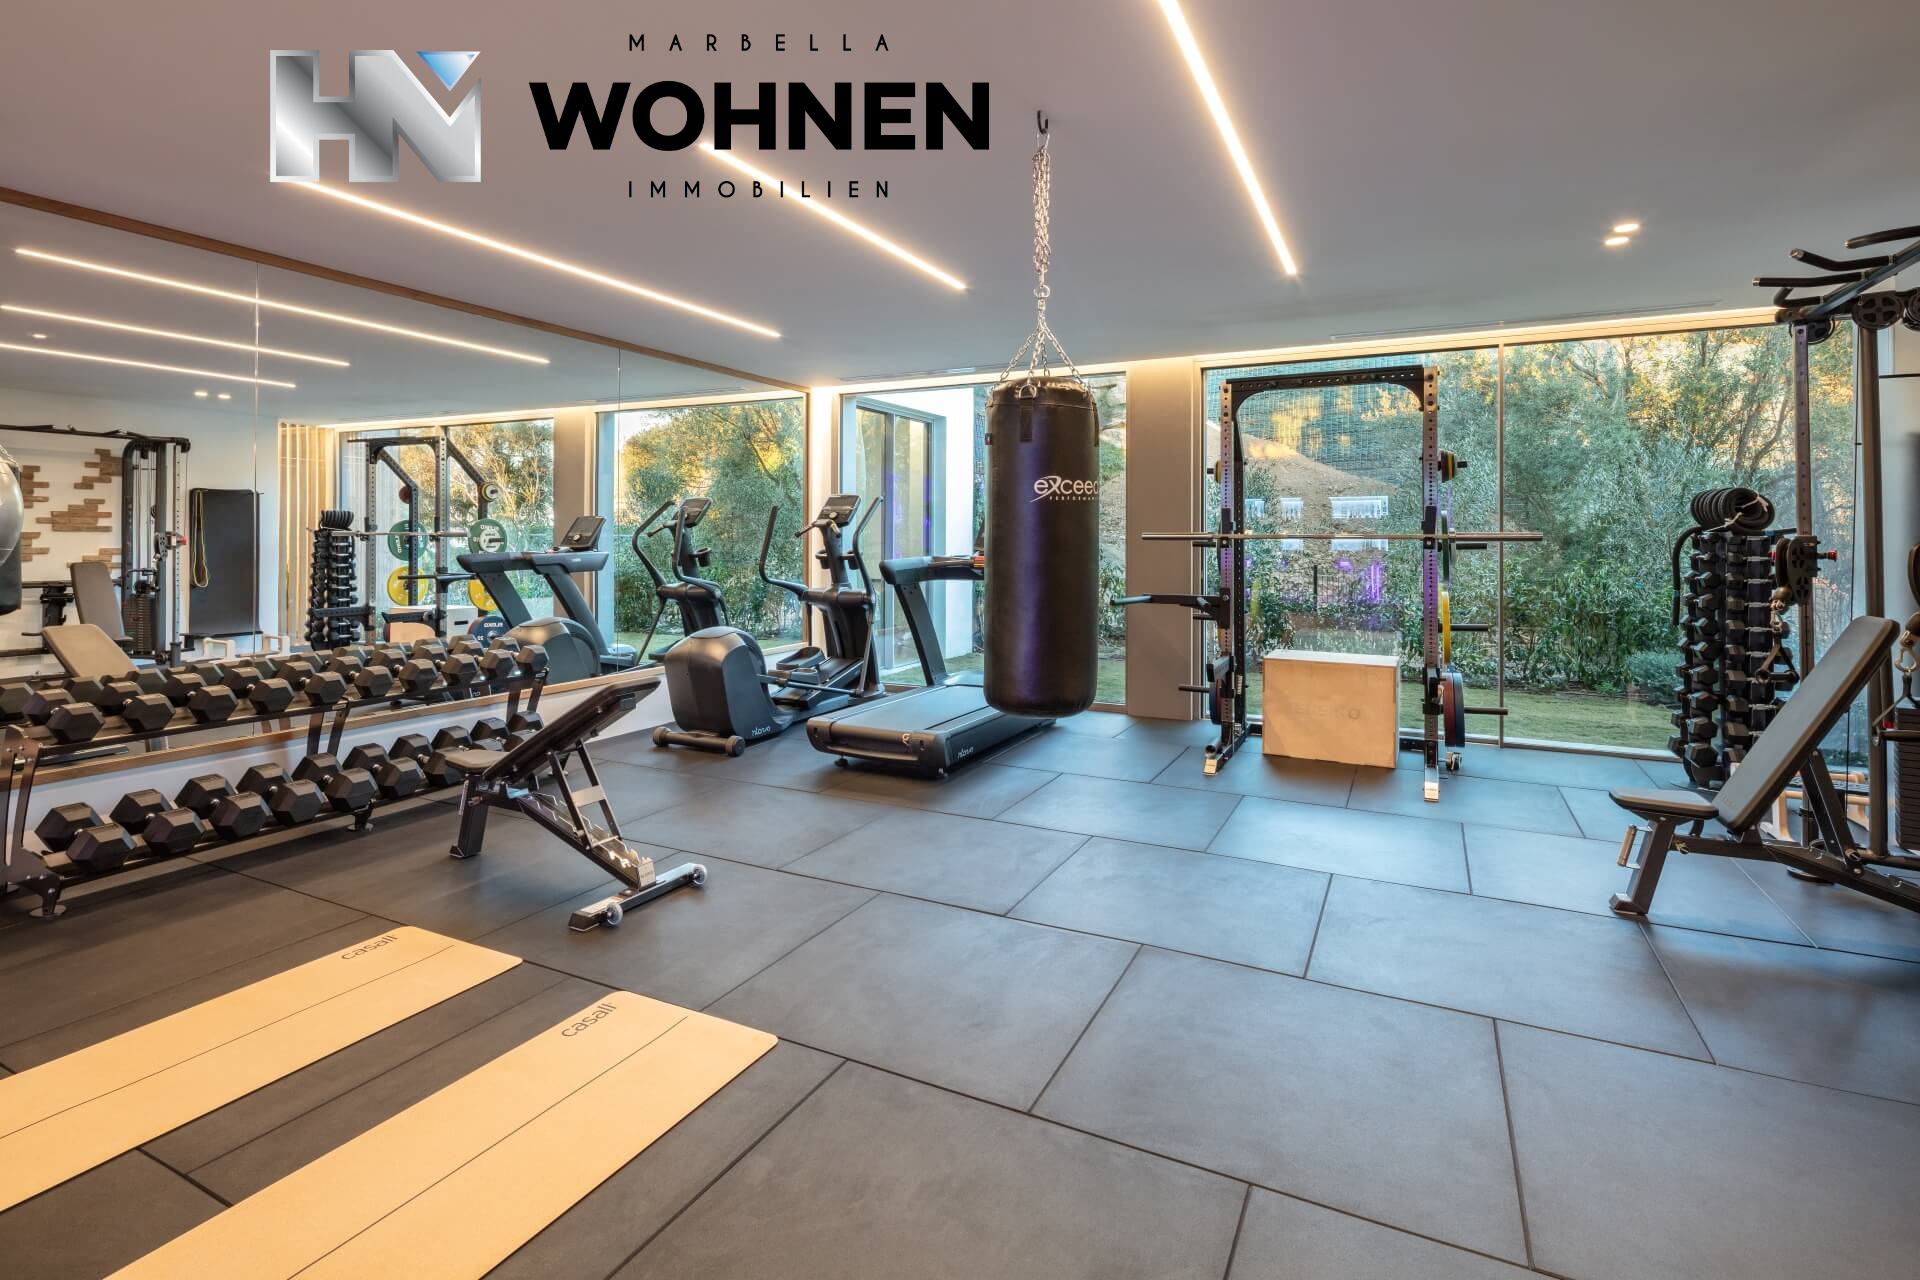 MARBELLA WOHNEN – GYMS AT HOME – Home gym design and equipment